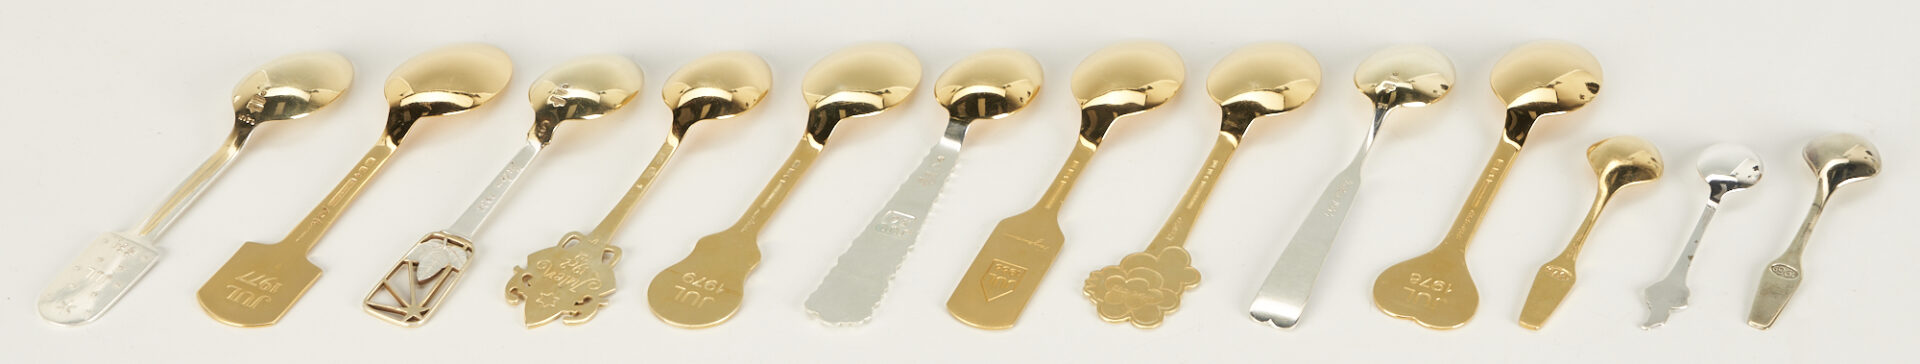 Lot 1107: 10 Michelsen Gilded Sterling Christmas Spoons, 1934-1988 plus 3 Assorted